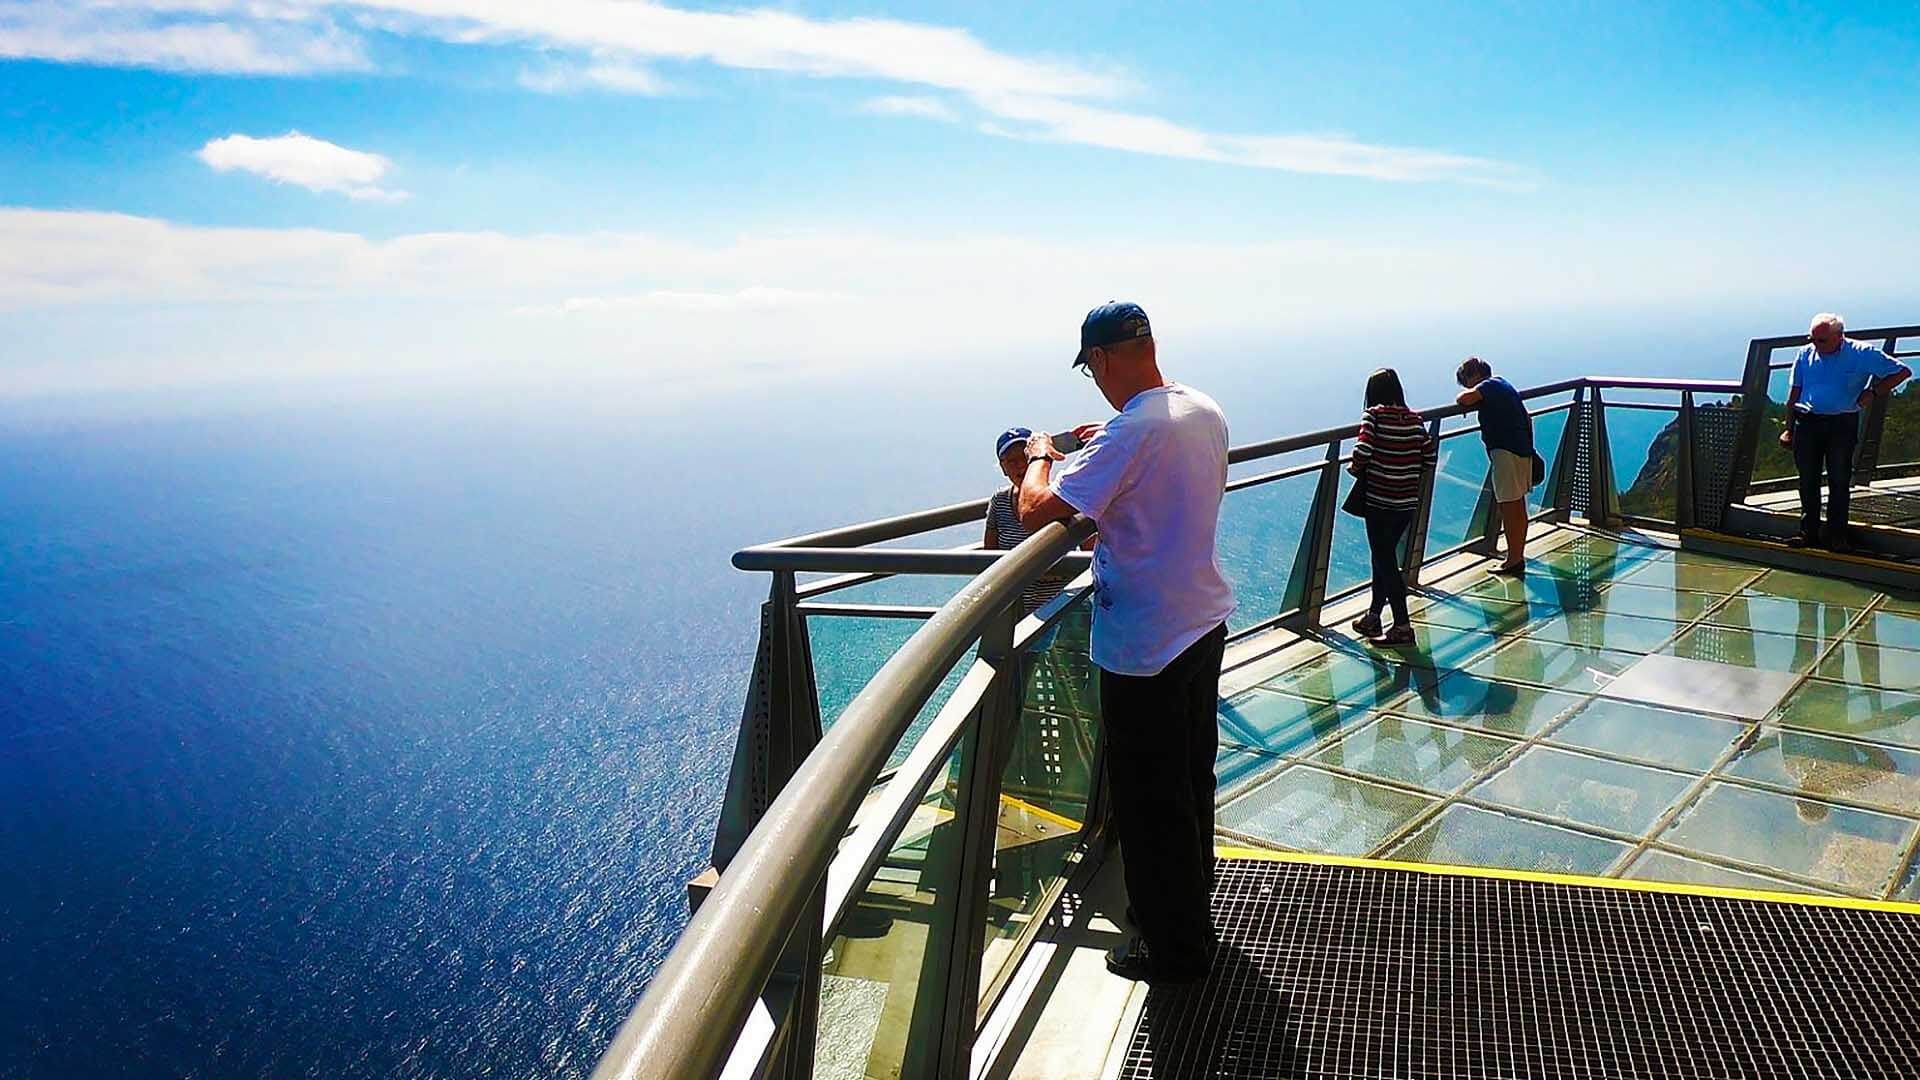 PRIVATE SKYWALK & PROFESSIONAL WINE EXPERIENCE